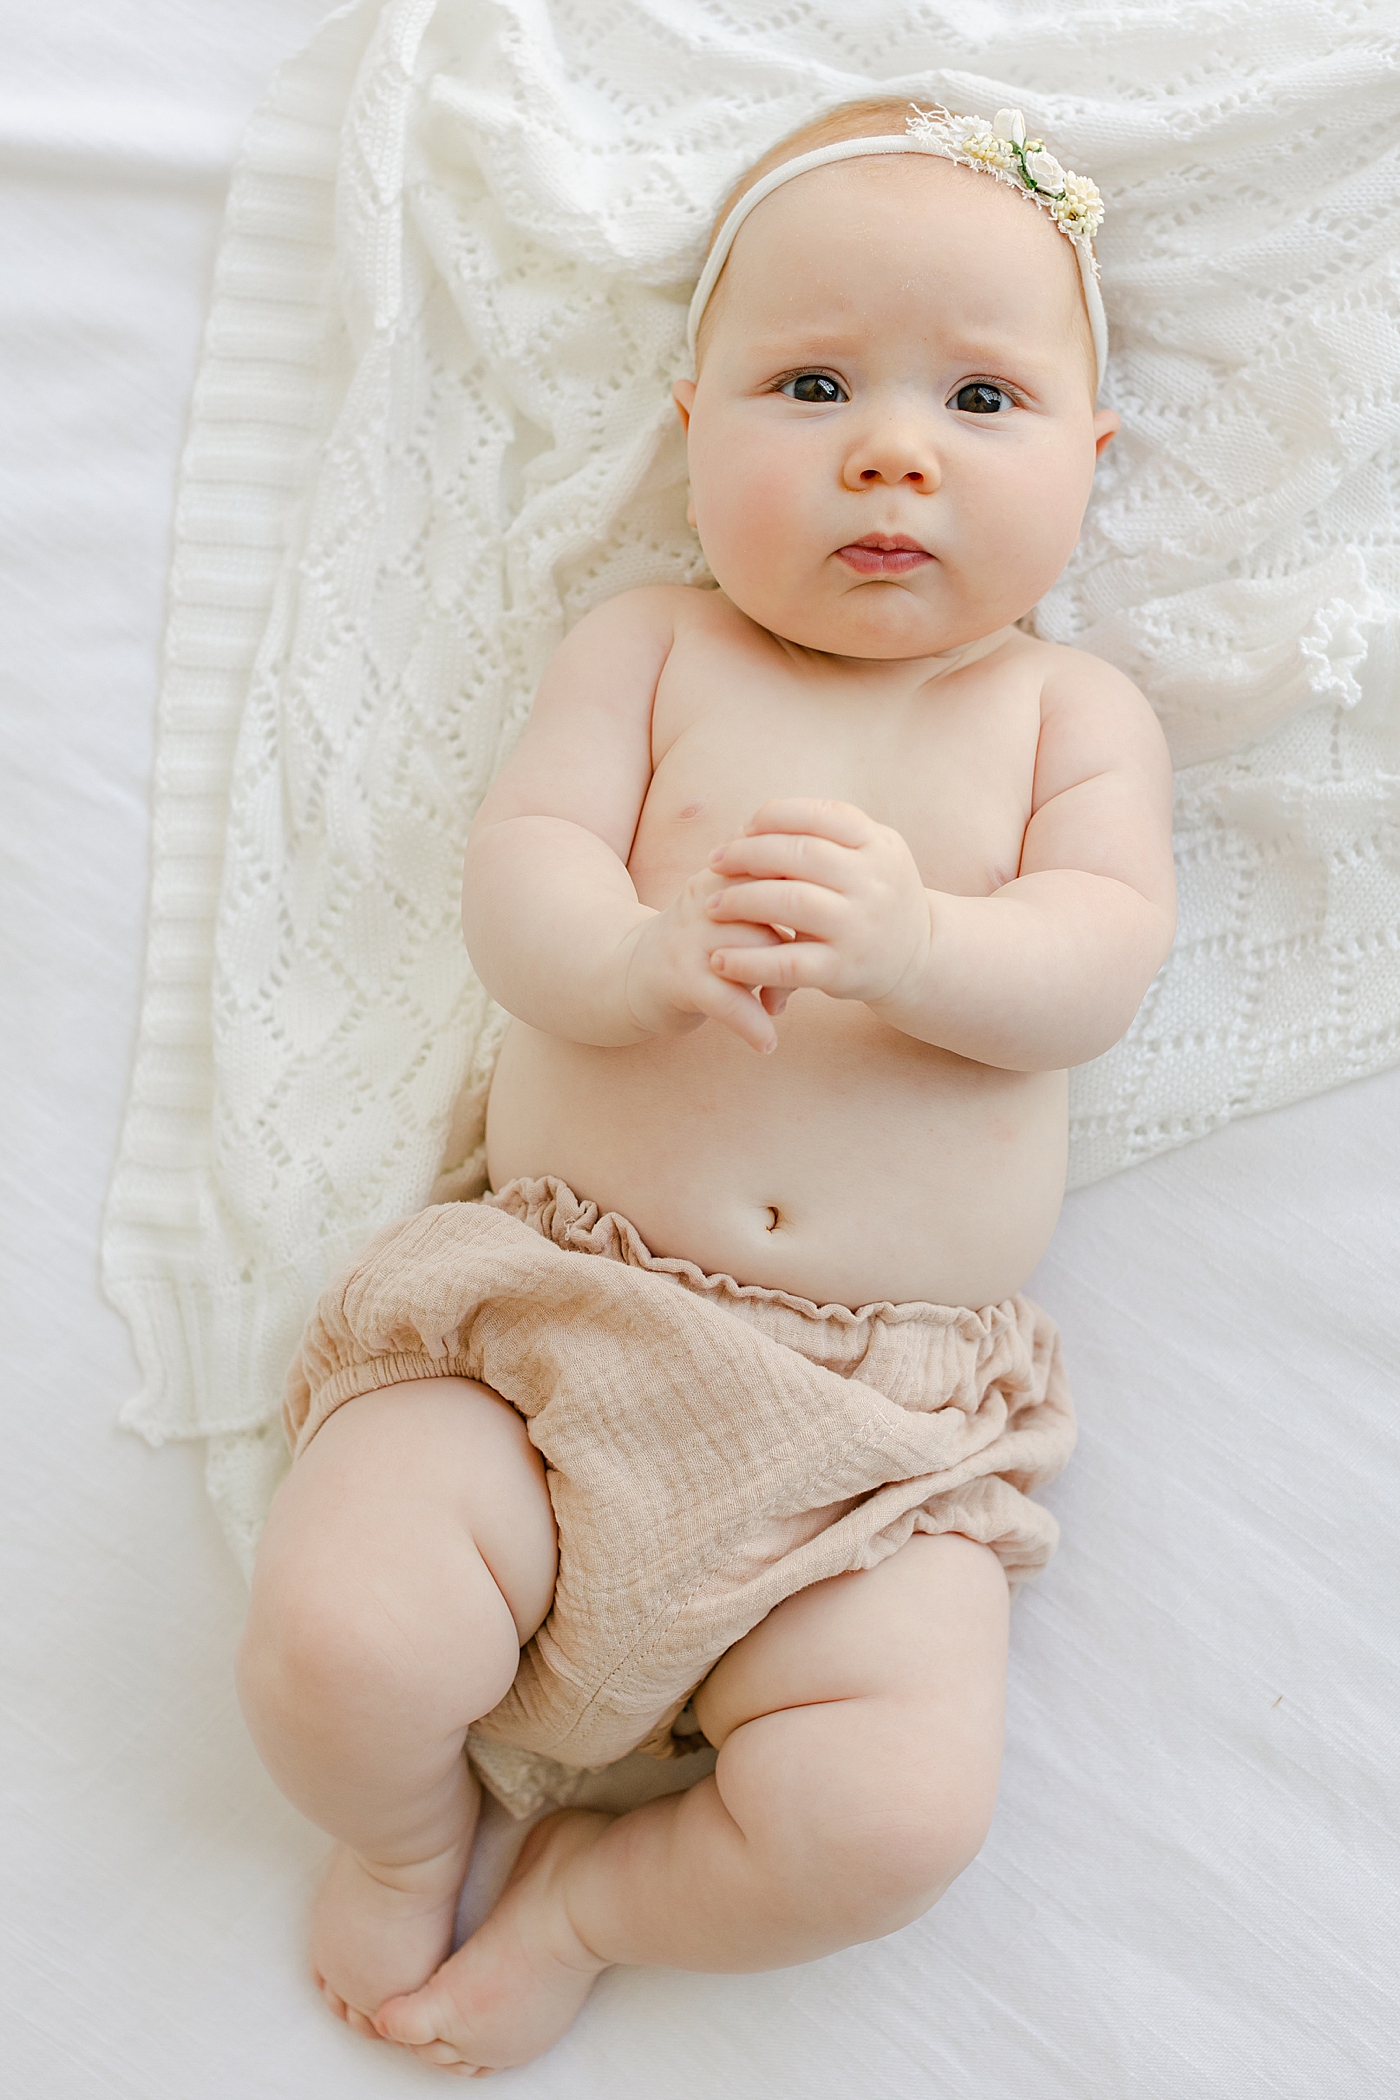 Baby girl in pink bloomers and floral headband | Image by Sana Ahmed Photography